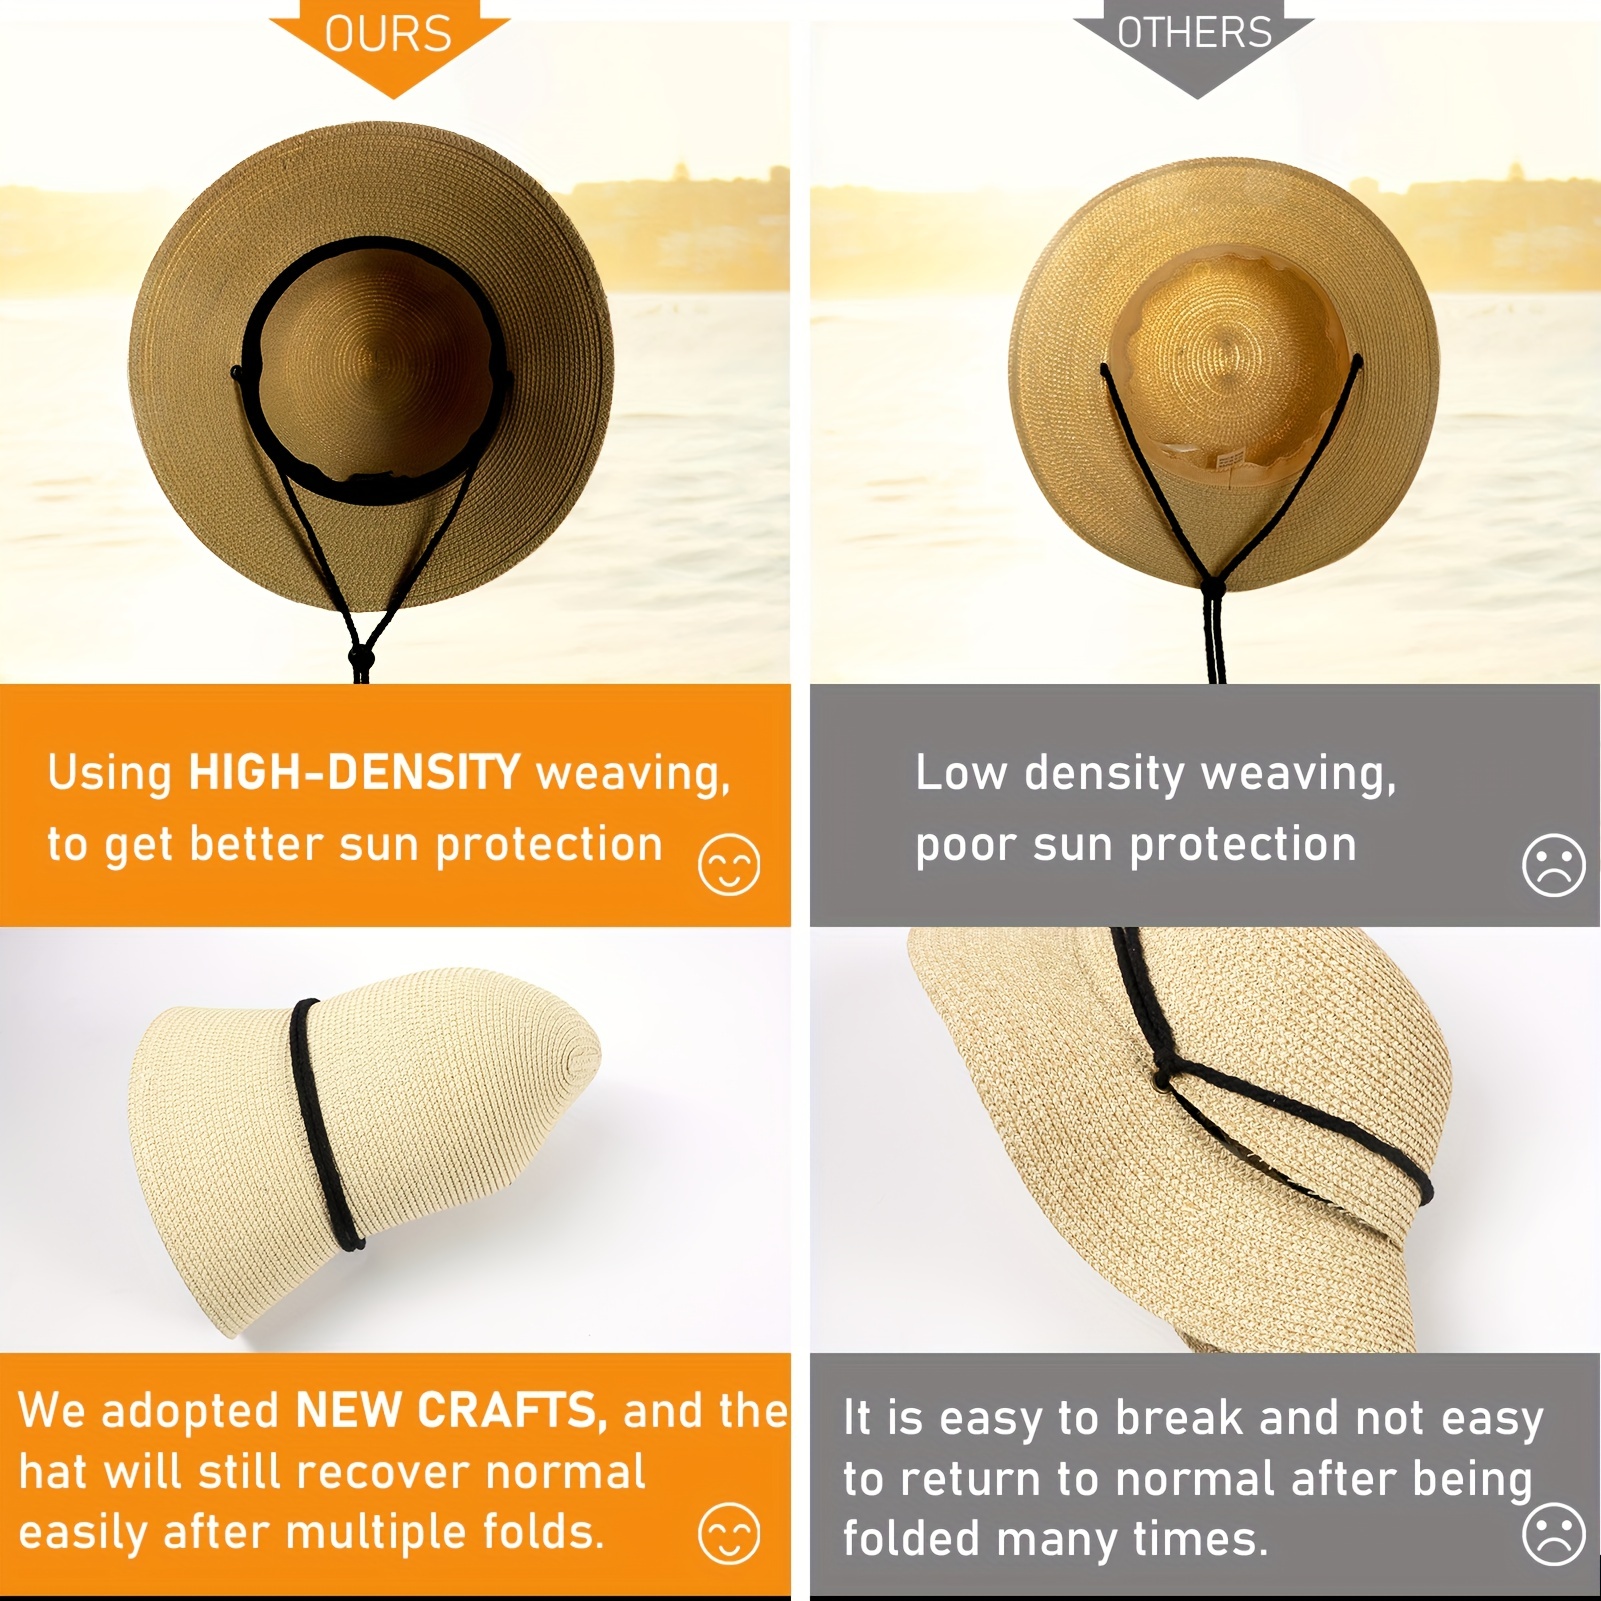 1pc Perforated Straw Hat Summer Sun Hat Sun Protection Beach Hat